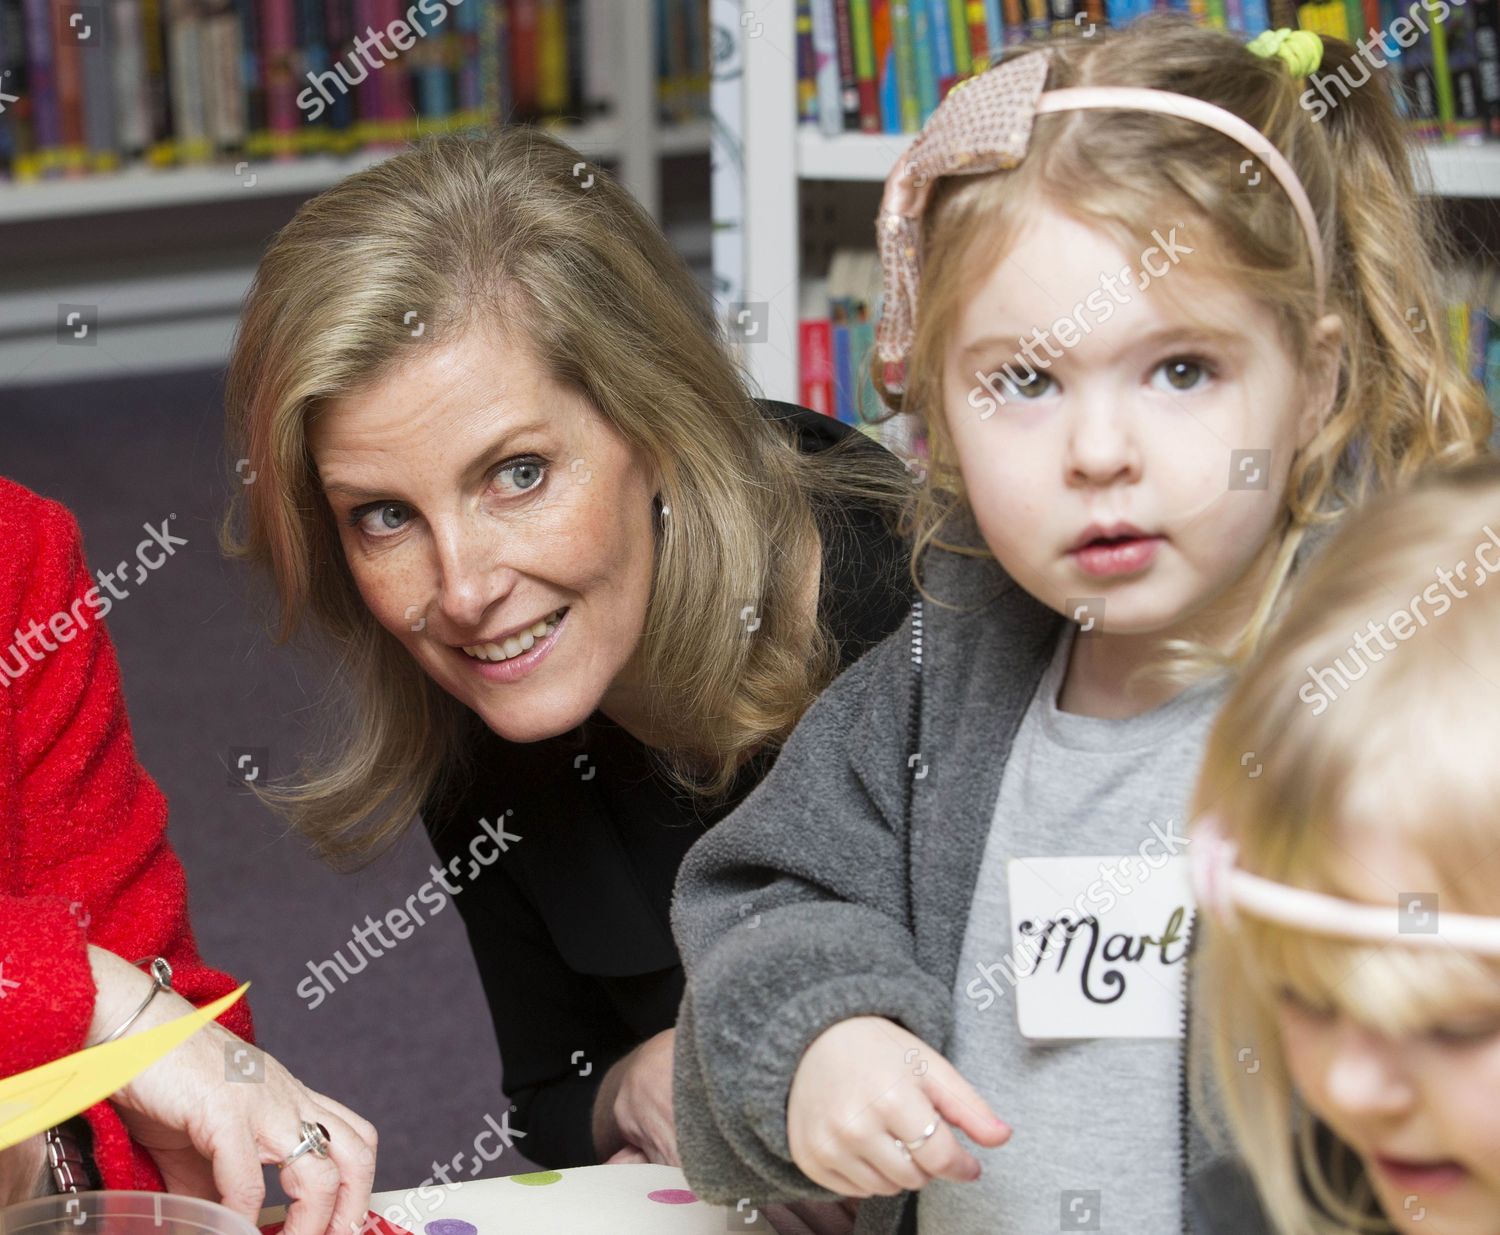 sophie-countess-of-wessex-visits-the-boyn-grove-resource-centre-maidenhead-britain-shutterstock-editorial-4428100d.jpg